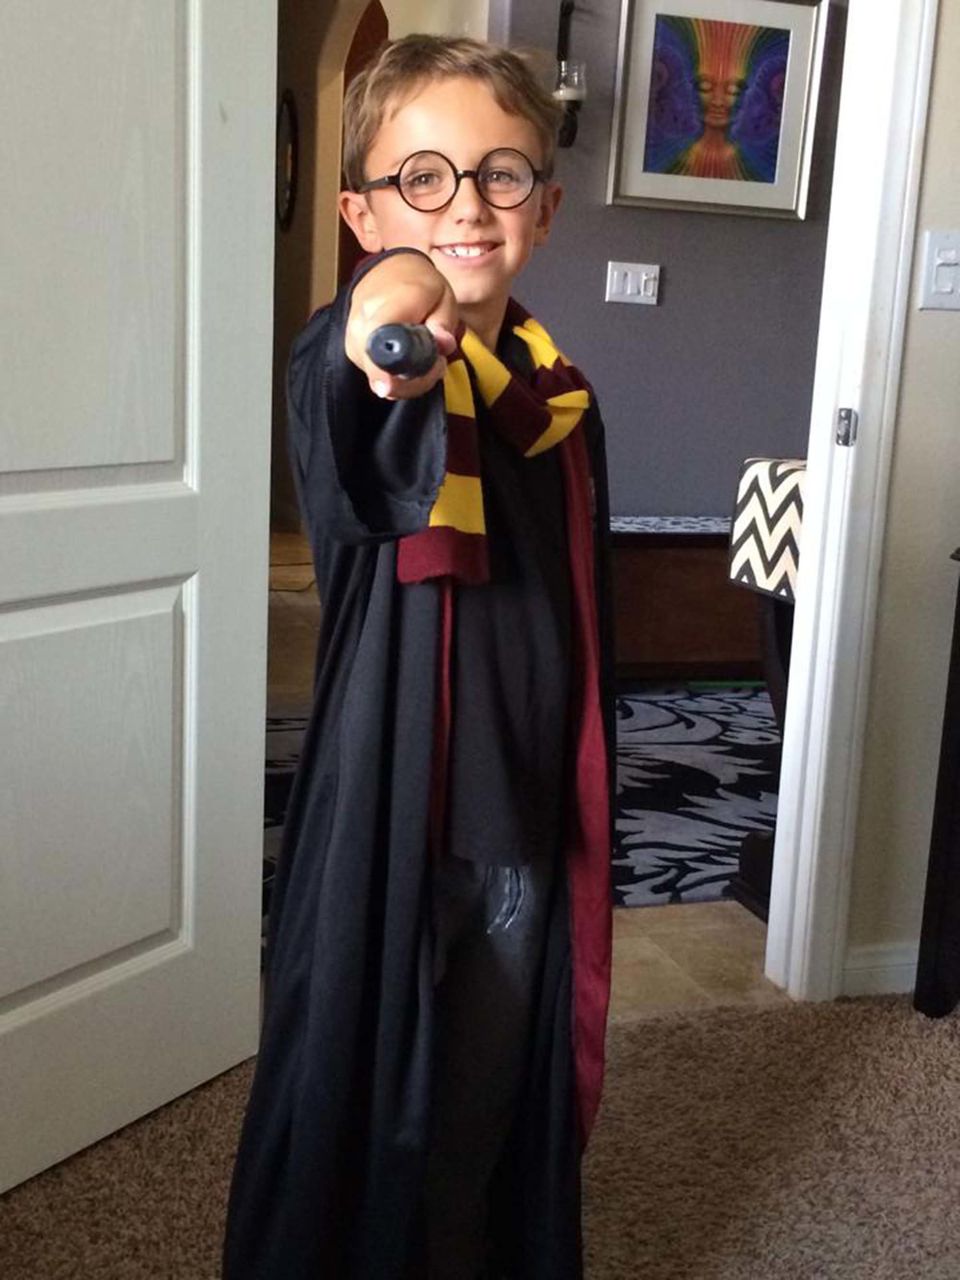 14 Awesome Halloween Costumes For Kids With Glasses | HuffPost Life